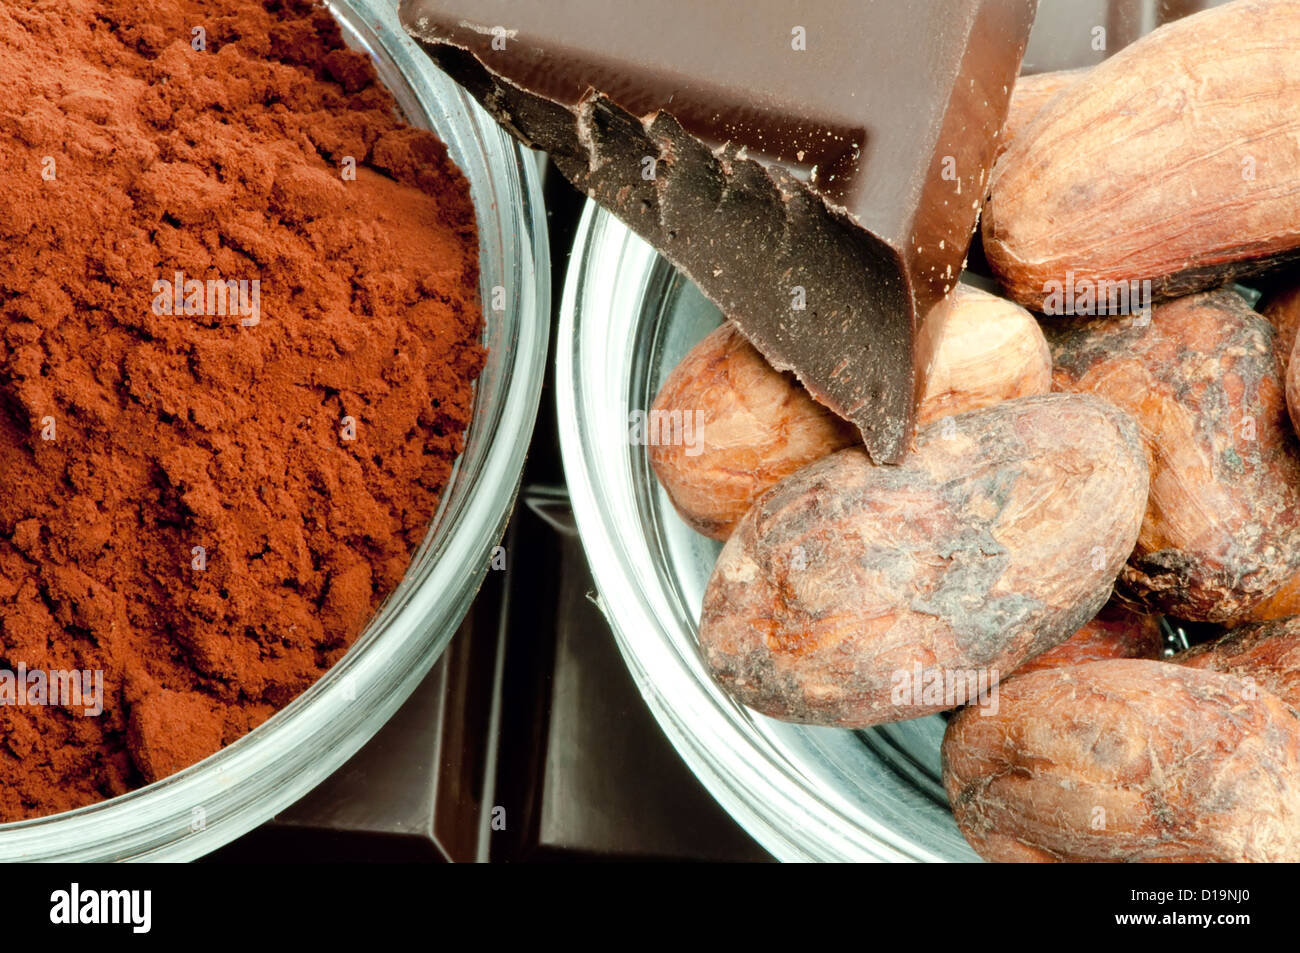 Cocoa beans, cocoa powder in bowls and chocolate bar close up Stock Photo